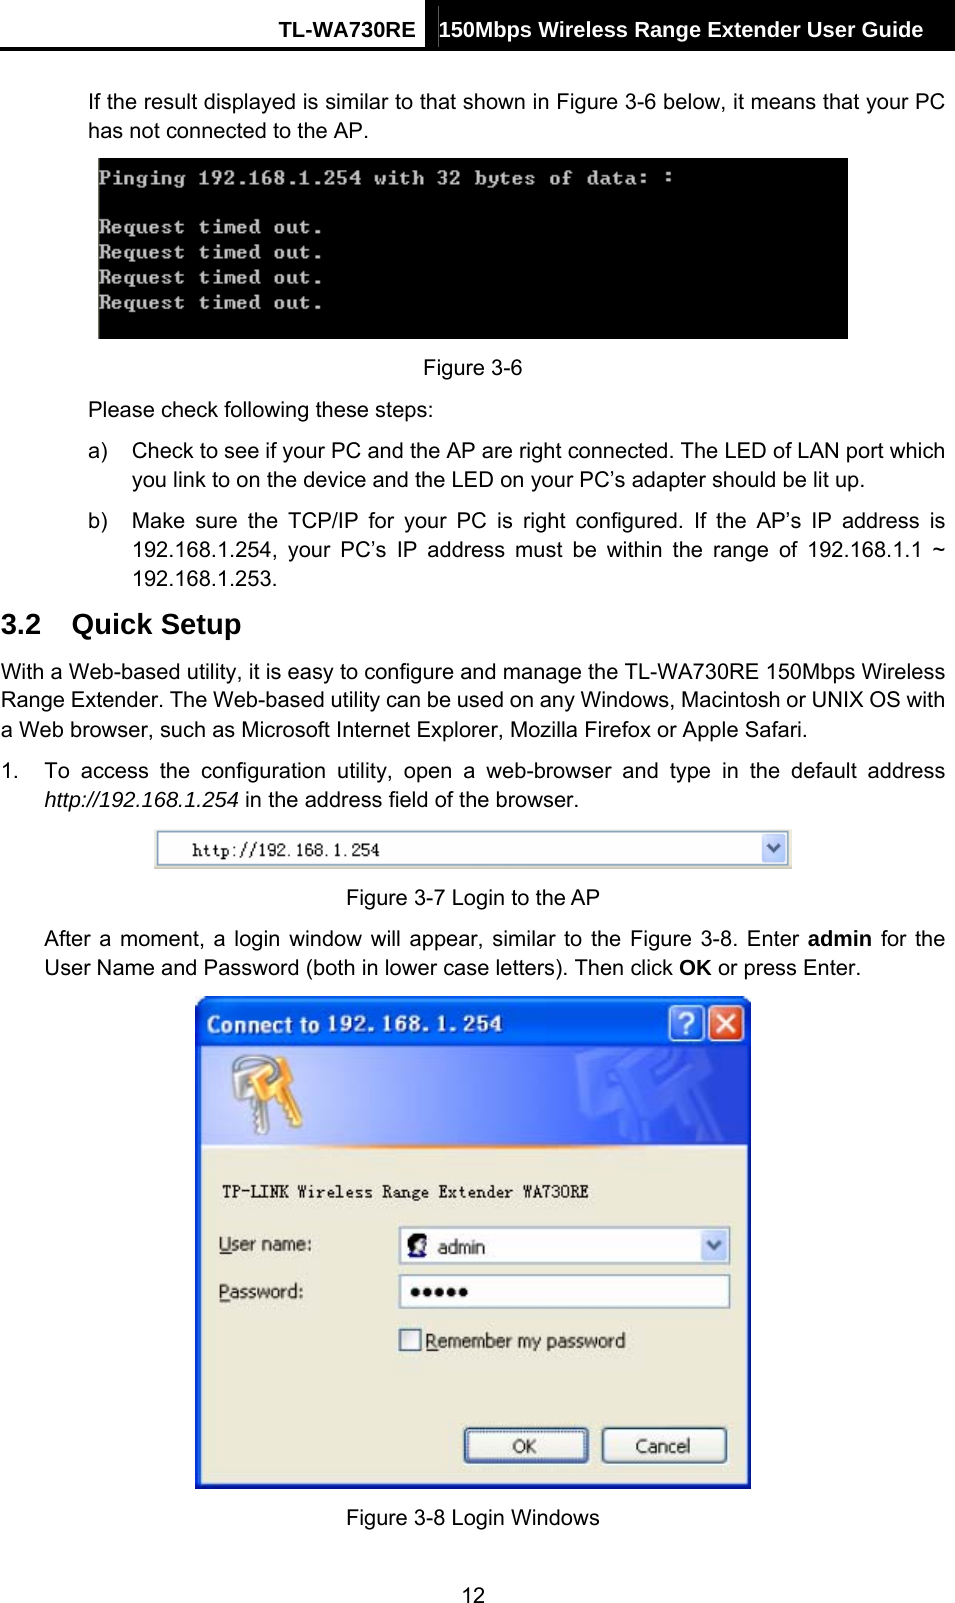 TL-WA730RE 150Mbps Wireless Range Extender User Guide  If the result displayed is similar to that shown in Figure 3-6 below, it means that your PC has not connected to the AP.  Figure 3-6 Please check following these steps: a)  Check to see if your PC and the AP are right connected. The LED of LAN port which you link to on the device and the LED on your PC’s adapter should be lit up. b)  Make sure the TCP/IP for your PC is right configured. If the AP’s IP address is 192.168.1.254, your PC’s IP address must be within the range of 192.168.1.1 ~ 192.168.1.253. 3.2  Quick Setup With a Web-based utility, it is easy to configure and manage the TL-WA730RE 150Mbps Wireless Range Extender. The Web-based utility can be used on any Windows, Macintosh or UNIX OS with a Web browser, such as Microsoft Internet Explorer, Mozilla Firefox or Apple Safari. 1.  To access the configuration utility, open a web-browser and type in the default address http://192.168.1.254 in the address field of the browser.  Figure 3-7 Login to the AP After a moment, a login window will appear, similar to the Figure 3-8. Enter admin for the User Name and Password (both in lower case letters). Then click OK or press Enter.  Figure 3-8 Login Windows 12 